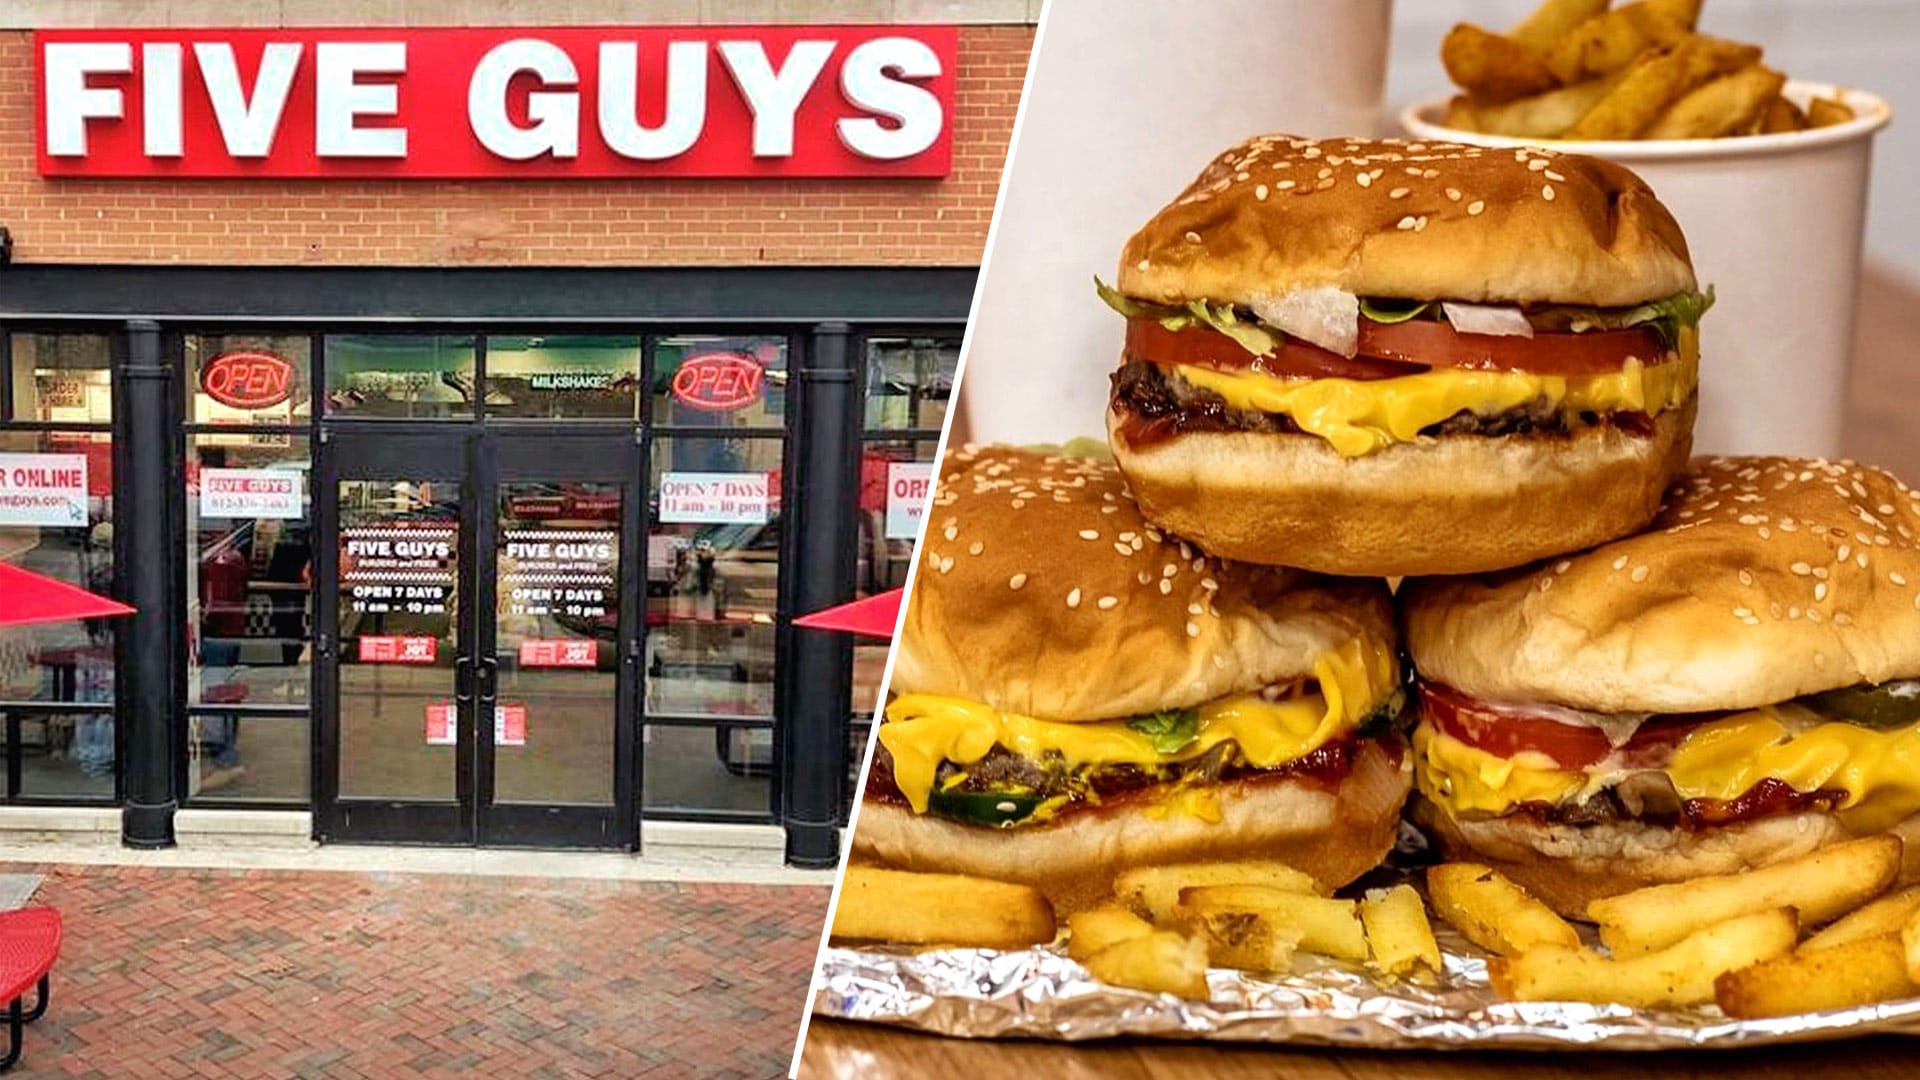 Exclusive: American Burger Chain Five Guys Likely To Open In Singapore